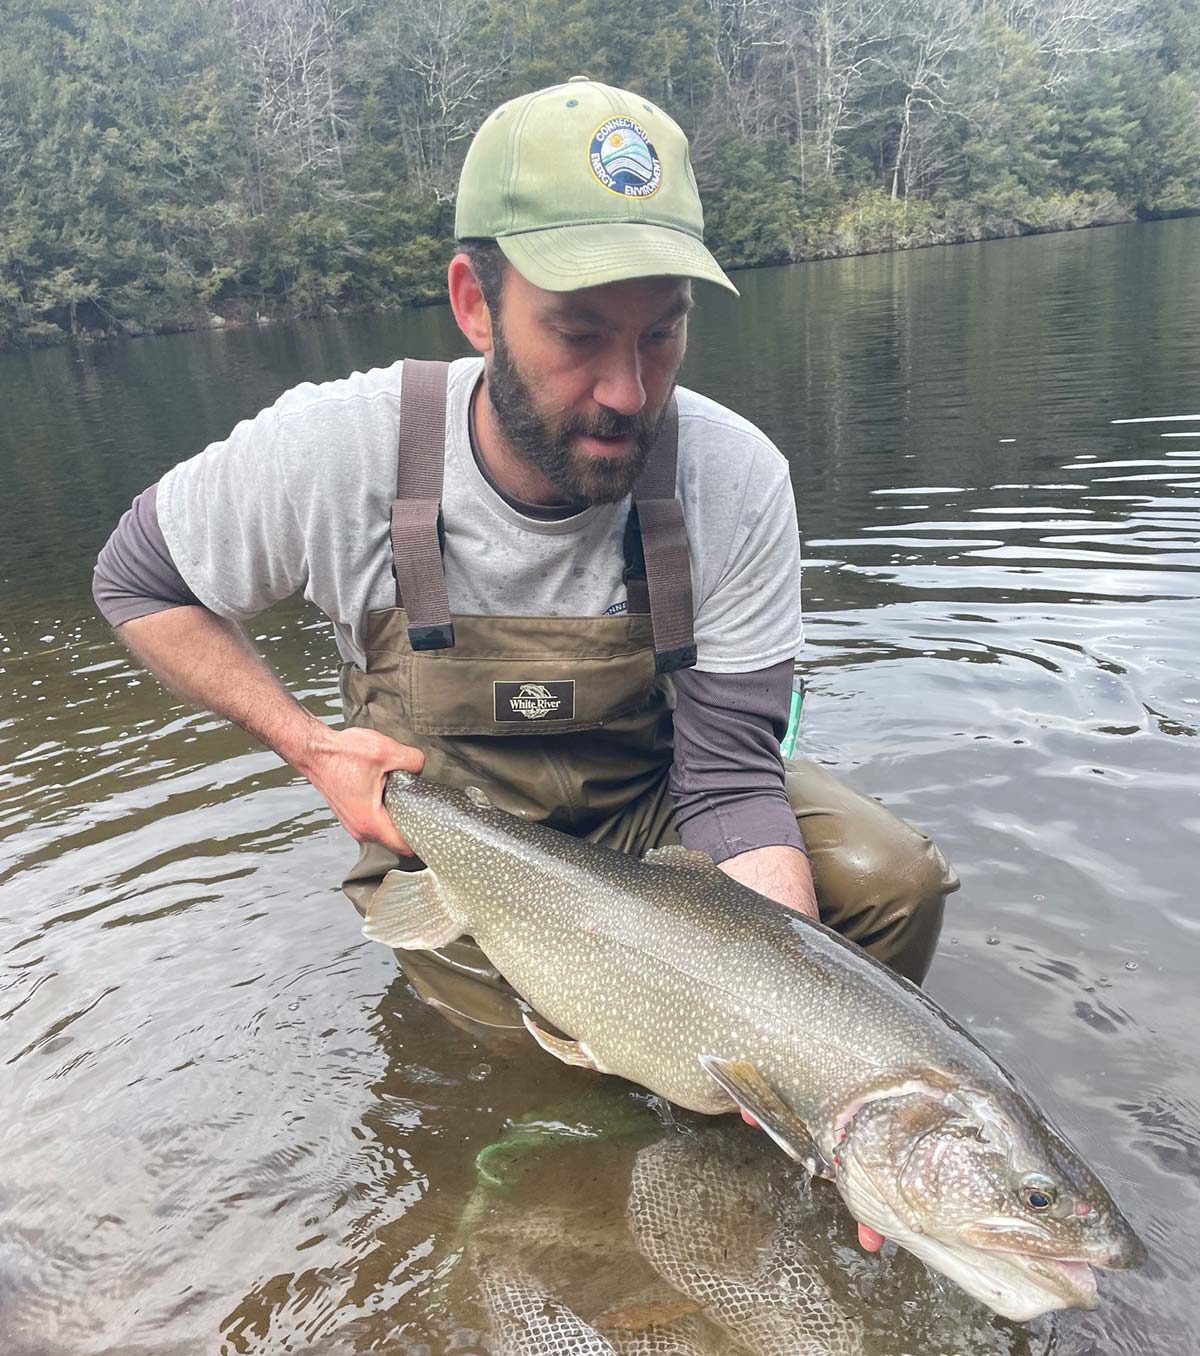 Connecticut Stocks Trophy Lake Trout! - The Fisherman